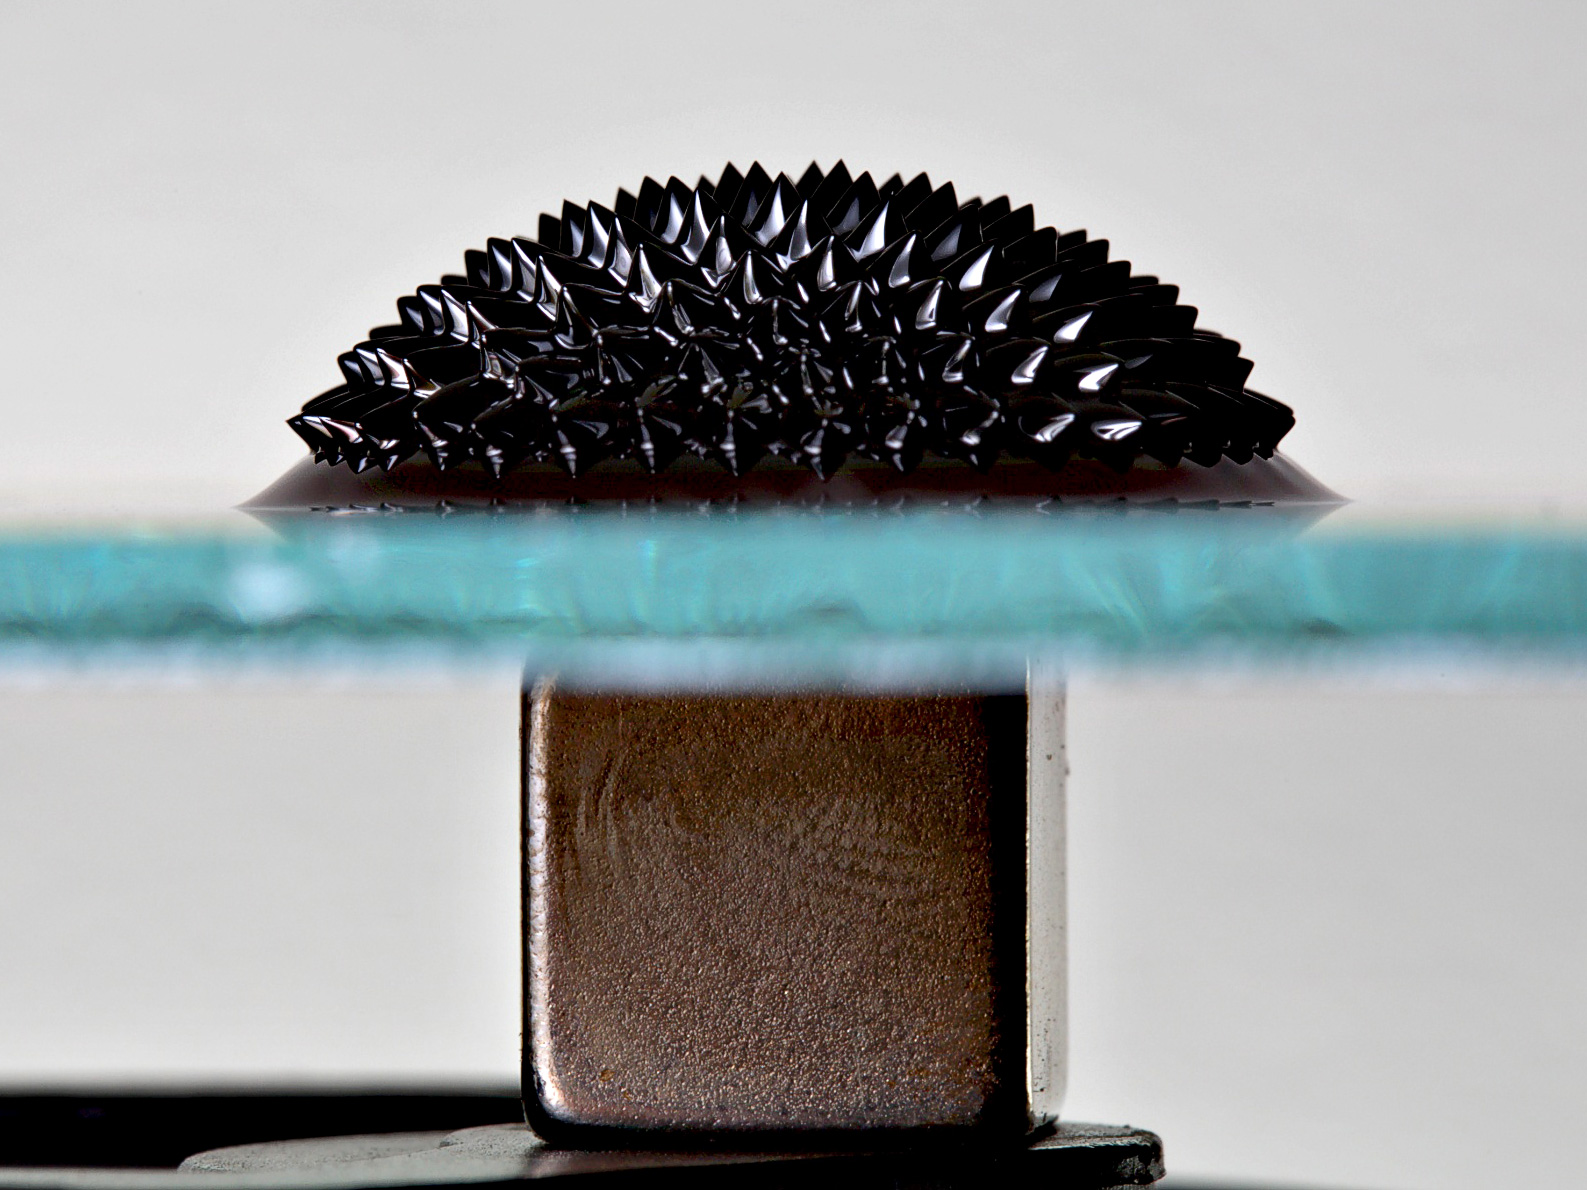 ferrofluid on glass plate under which a strong magnet is placed